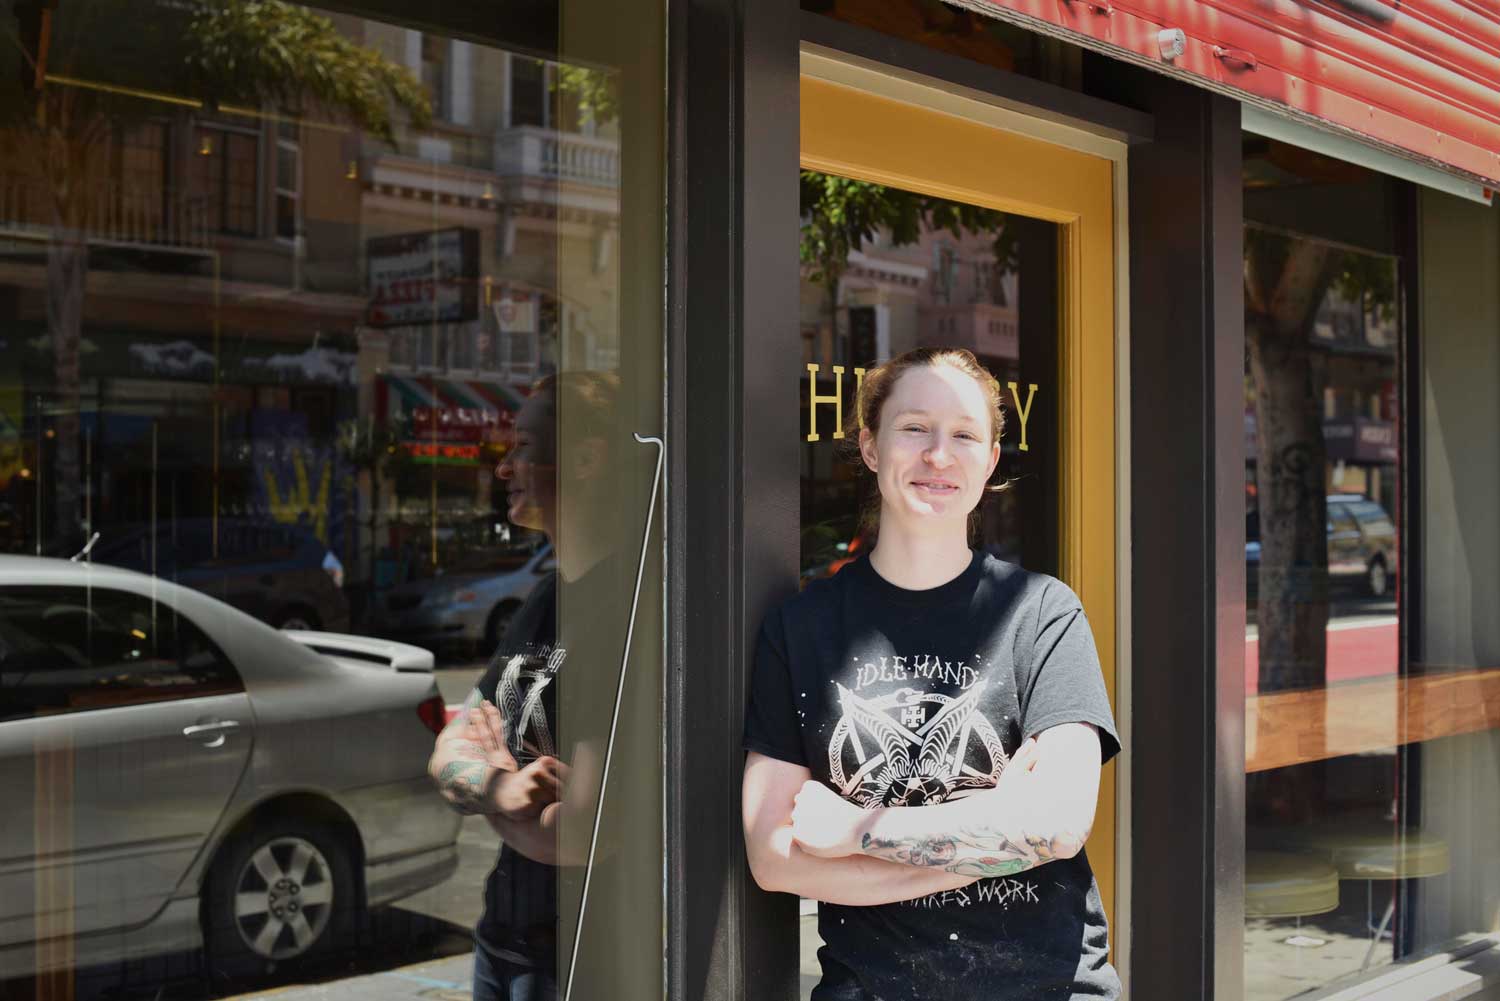 Chef Sara Hauman and Huxley's owners wanted Huxley to be a neighborhood comfort stop. Though it still stands out in the Tenderloin, the restaurant is already seeing local regulars in its first year - especially for their popular Sunday brunch.